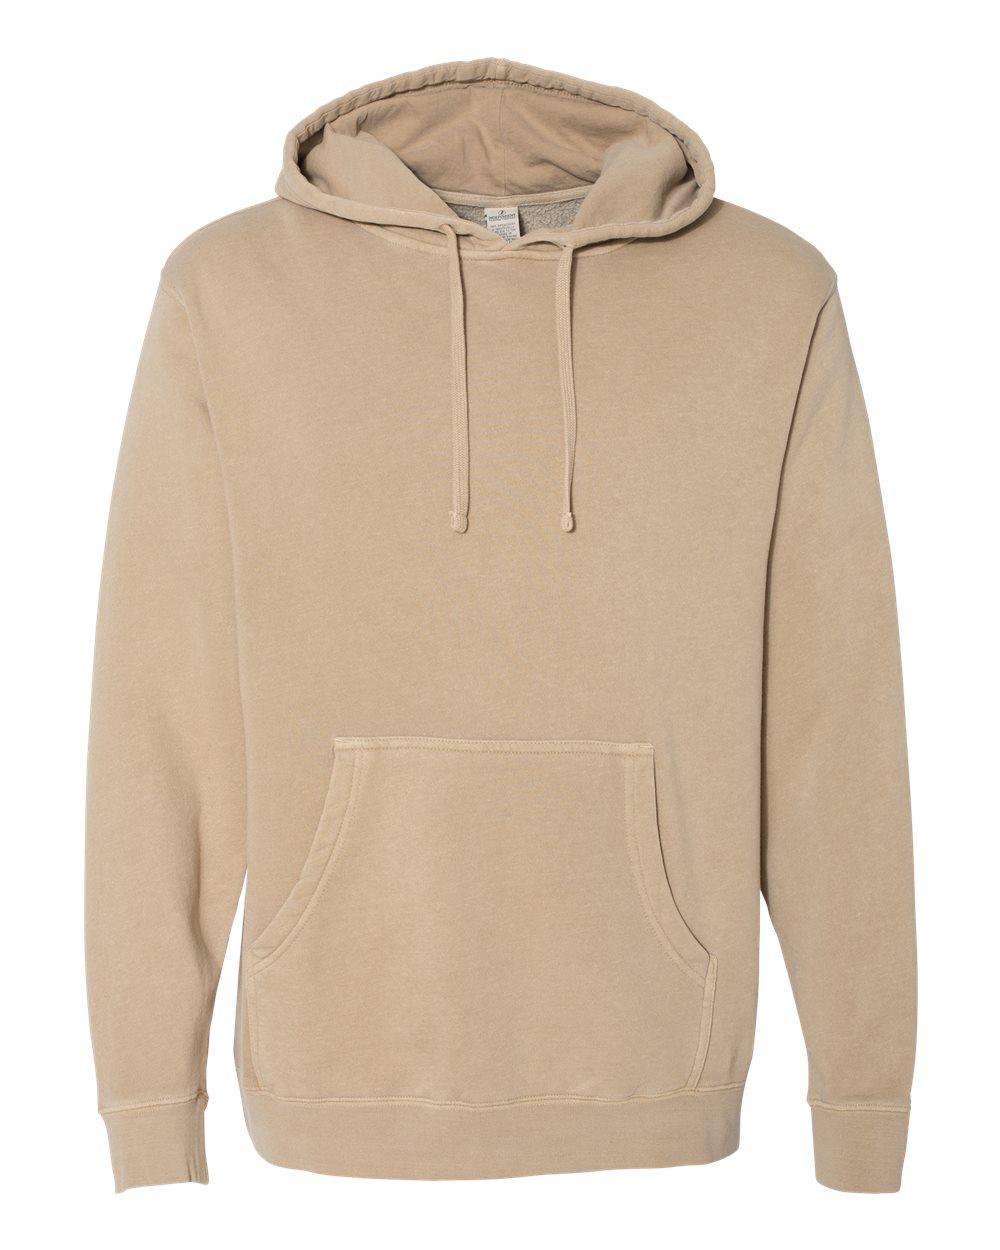 Blank Pigment Dyed Hoodies - Constantly Create Shop